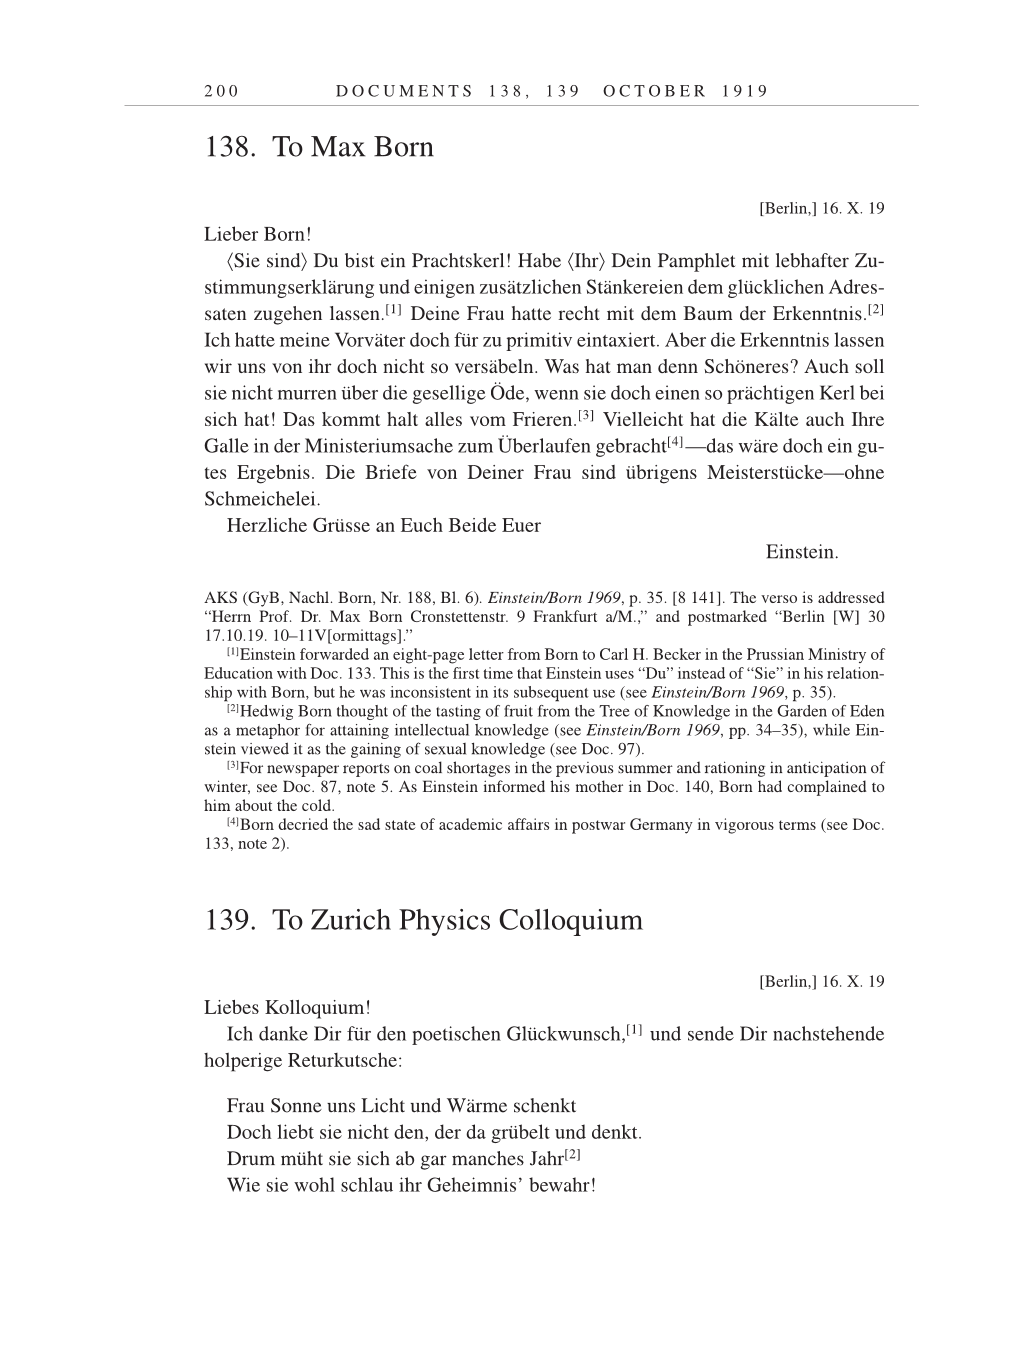 Volume 9: The Berlin Years: Correspondence January 1919-April 1920 page 200